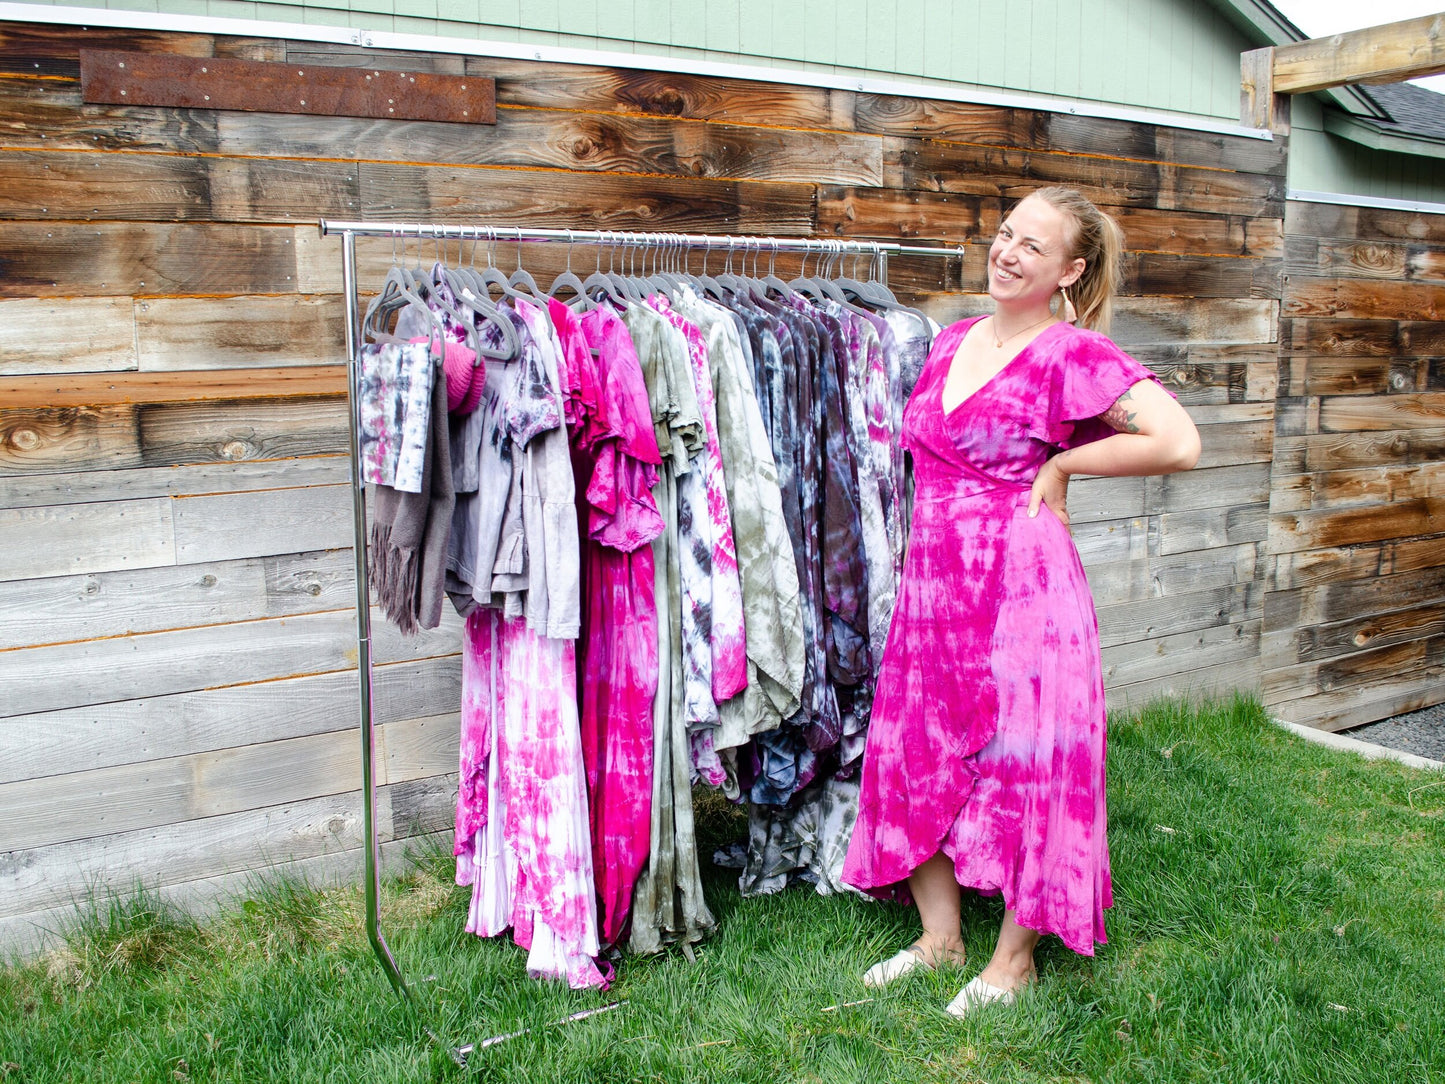 The Pink Celebration Wrap Dress by 1 Life - Bougainvillea